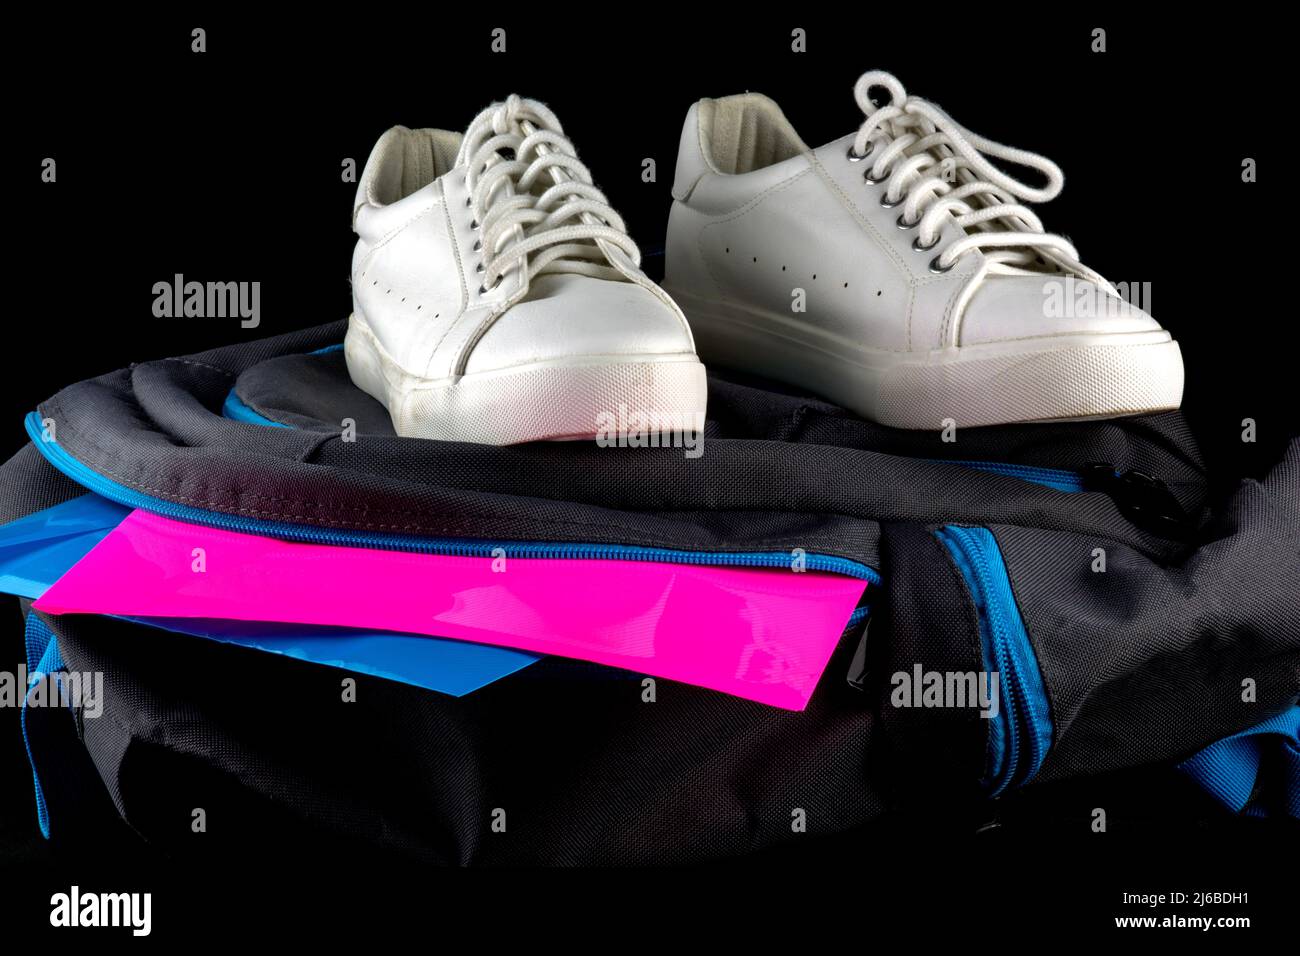 Closeup view of school shoes with school bag and files on a black background Stock Photo